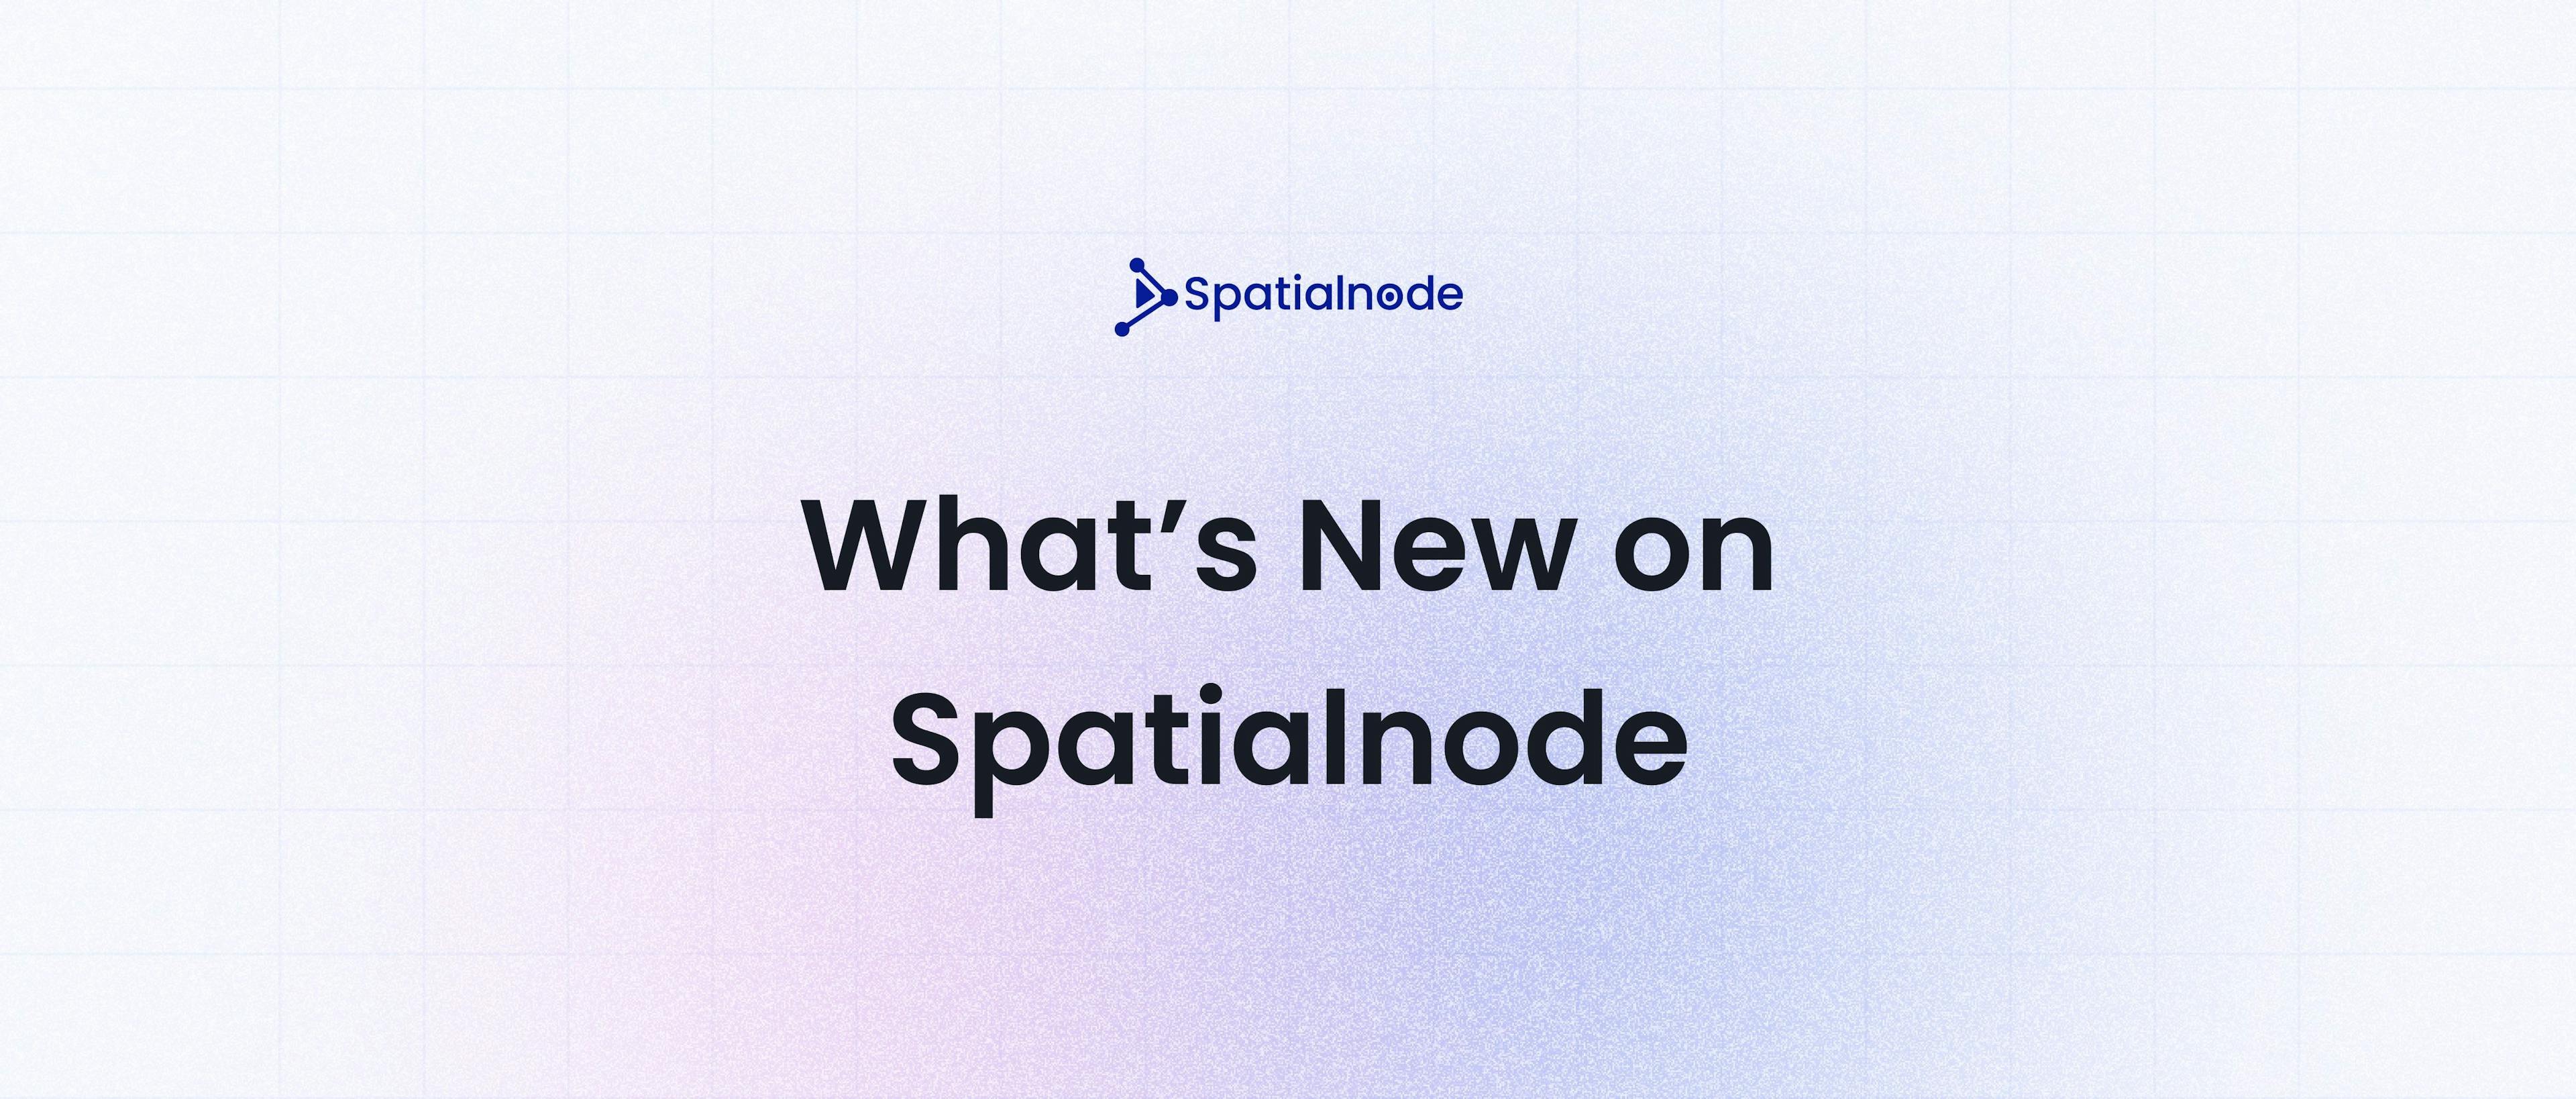 Spatialnode New Features and Highlights